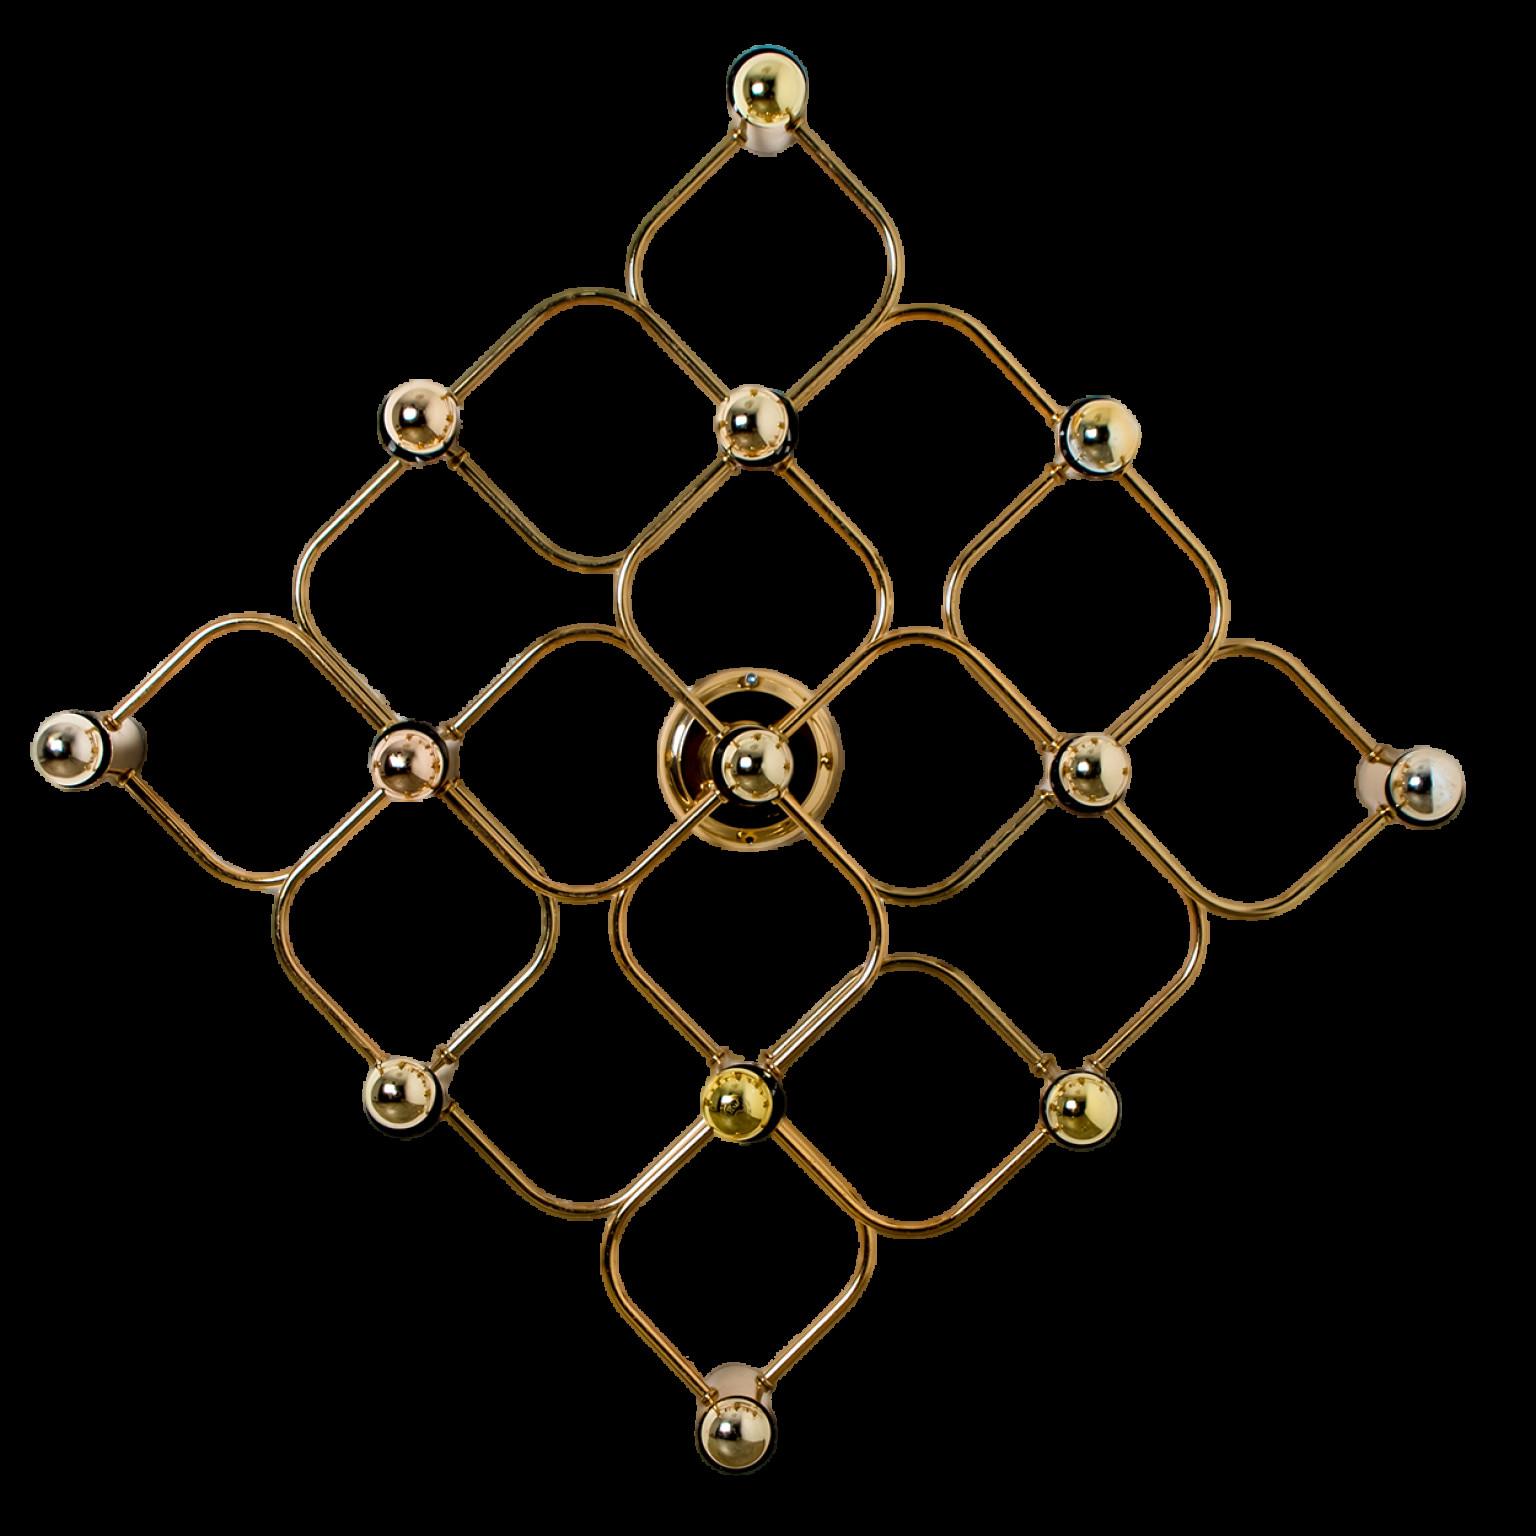 A gorgeous Sciolari-style ceiling or wall light. Made of a weave of golden rods, Germany, 1970s.

Dimensions:
Height: 25.98